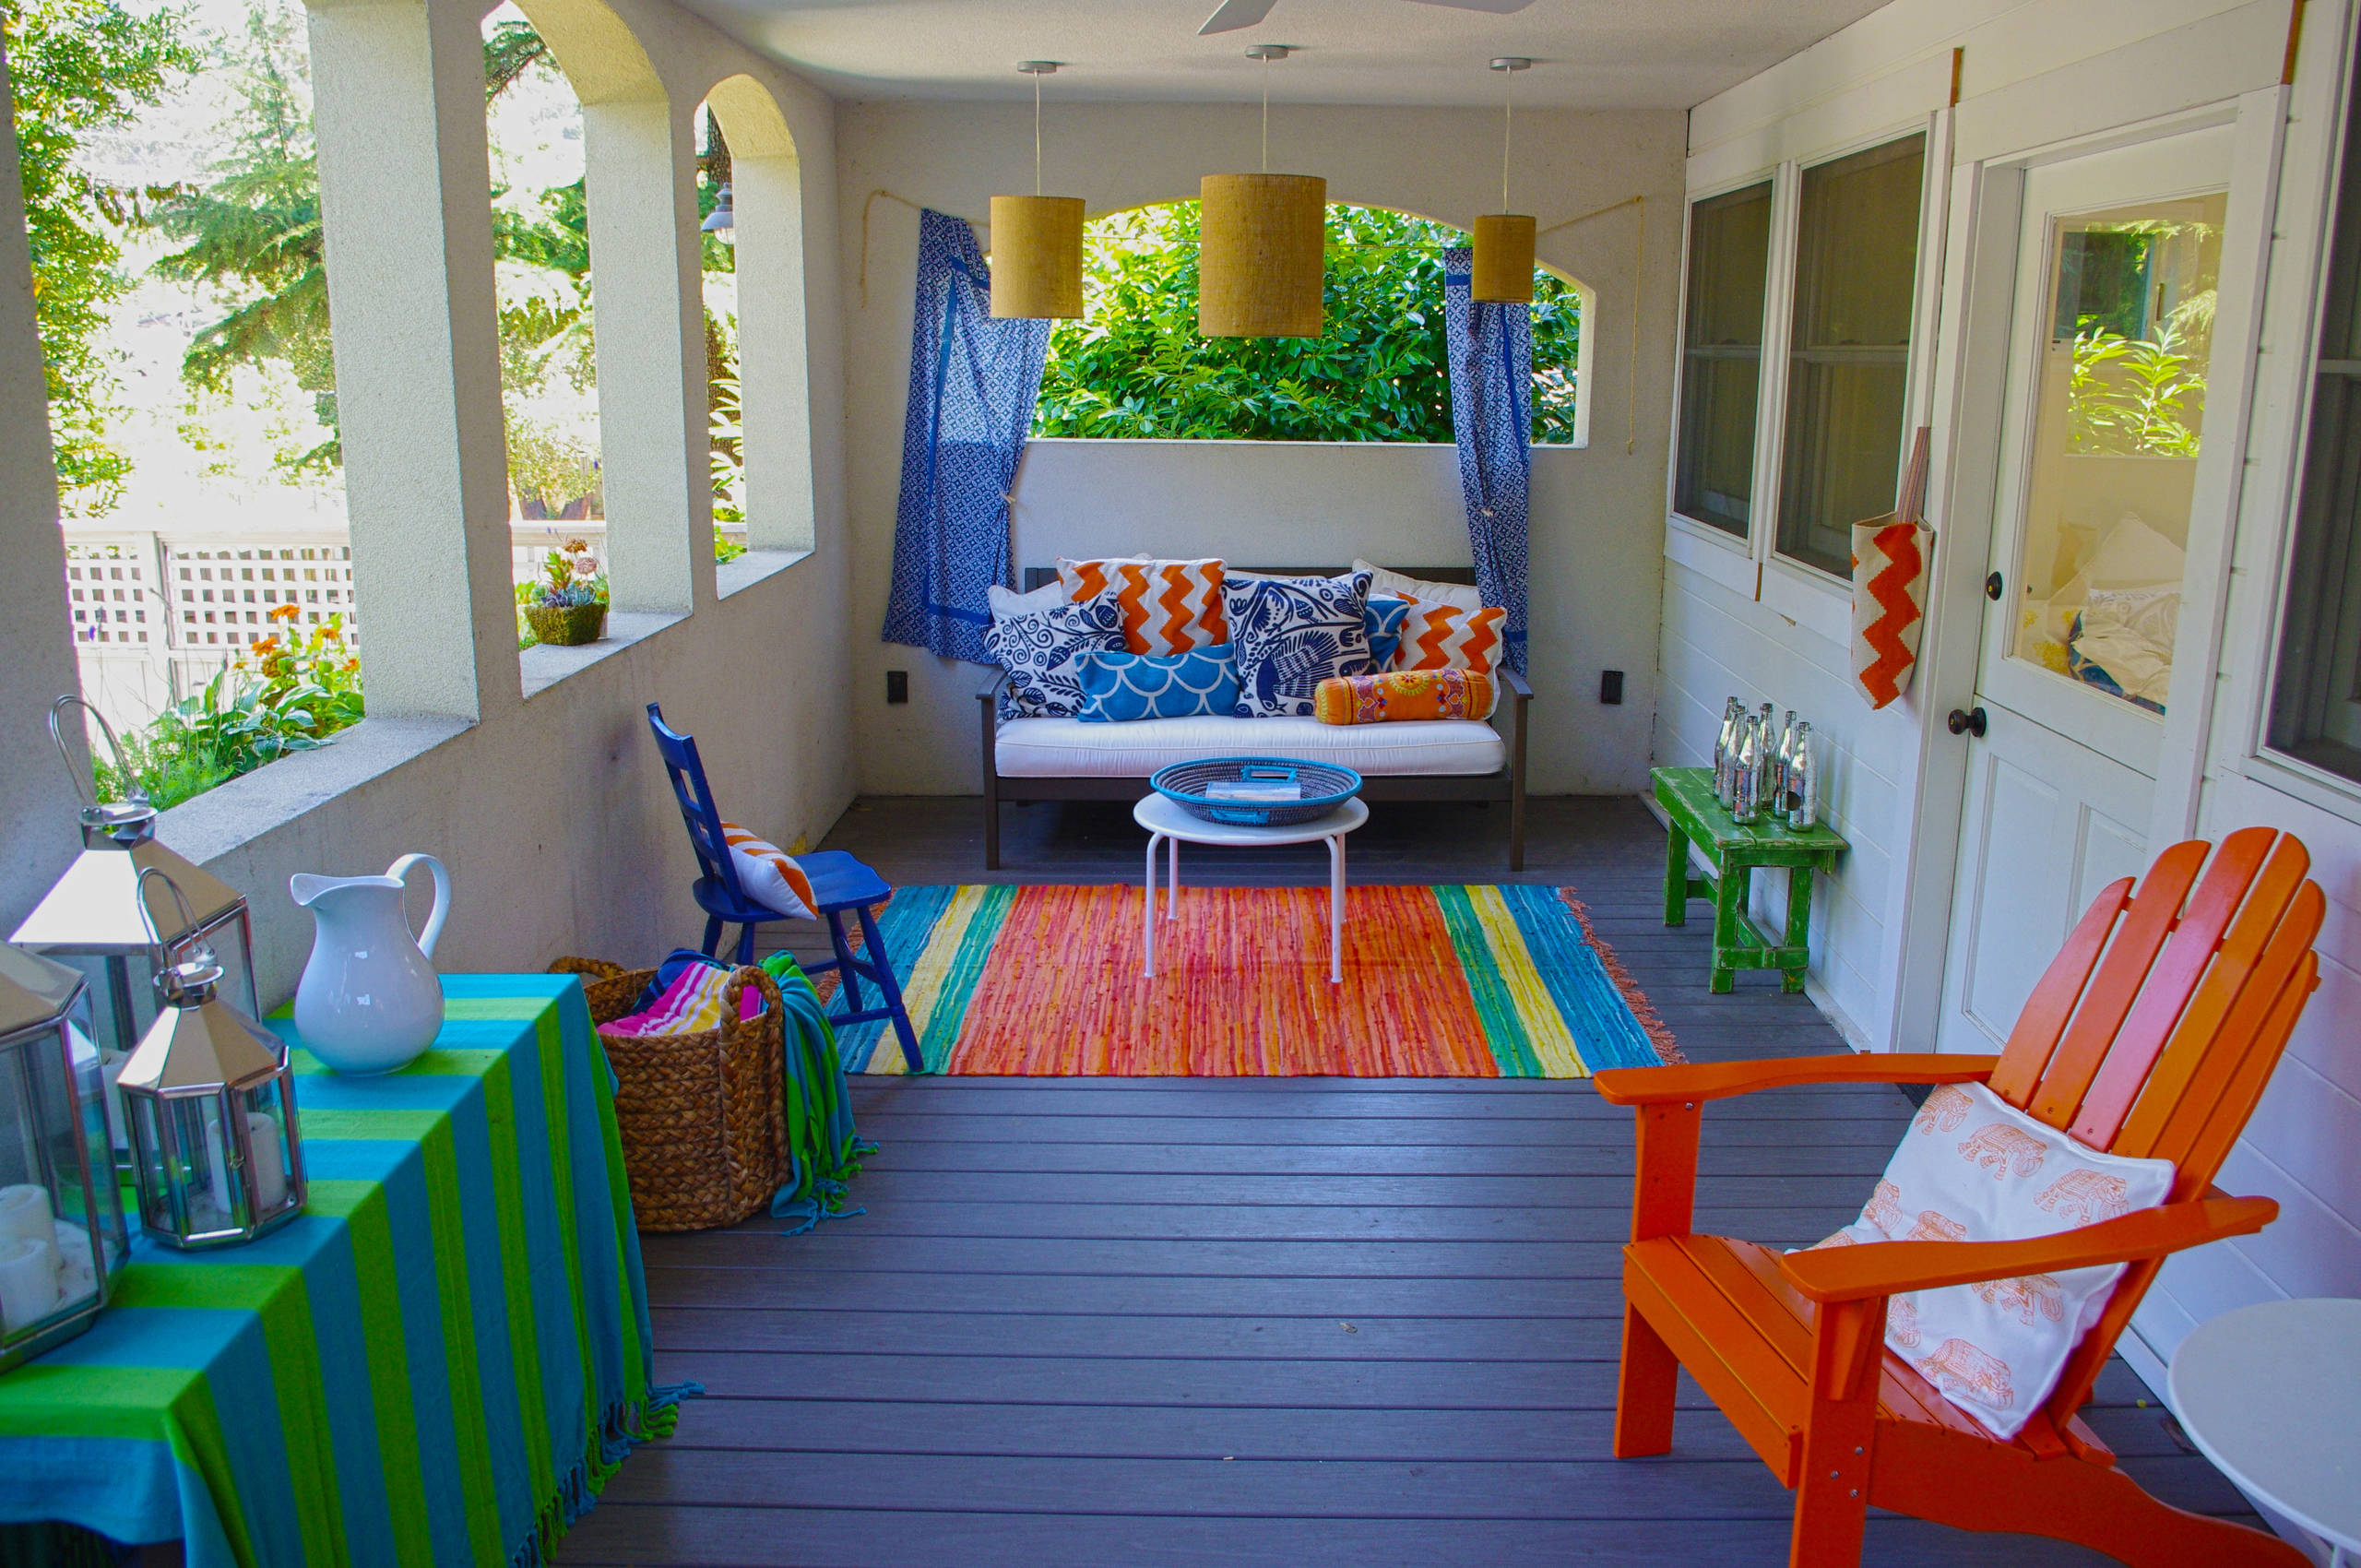 Let's Take This Outside! Pro Patio Ideas You'll Love - Chairish Blog